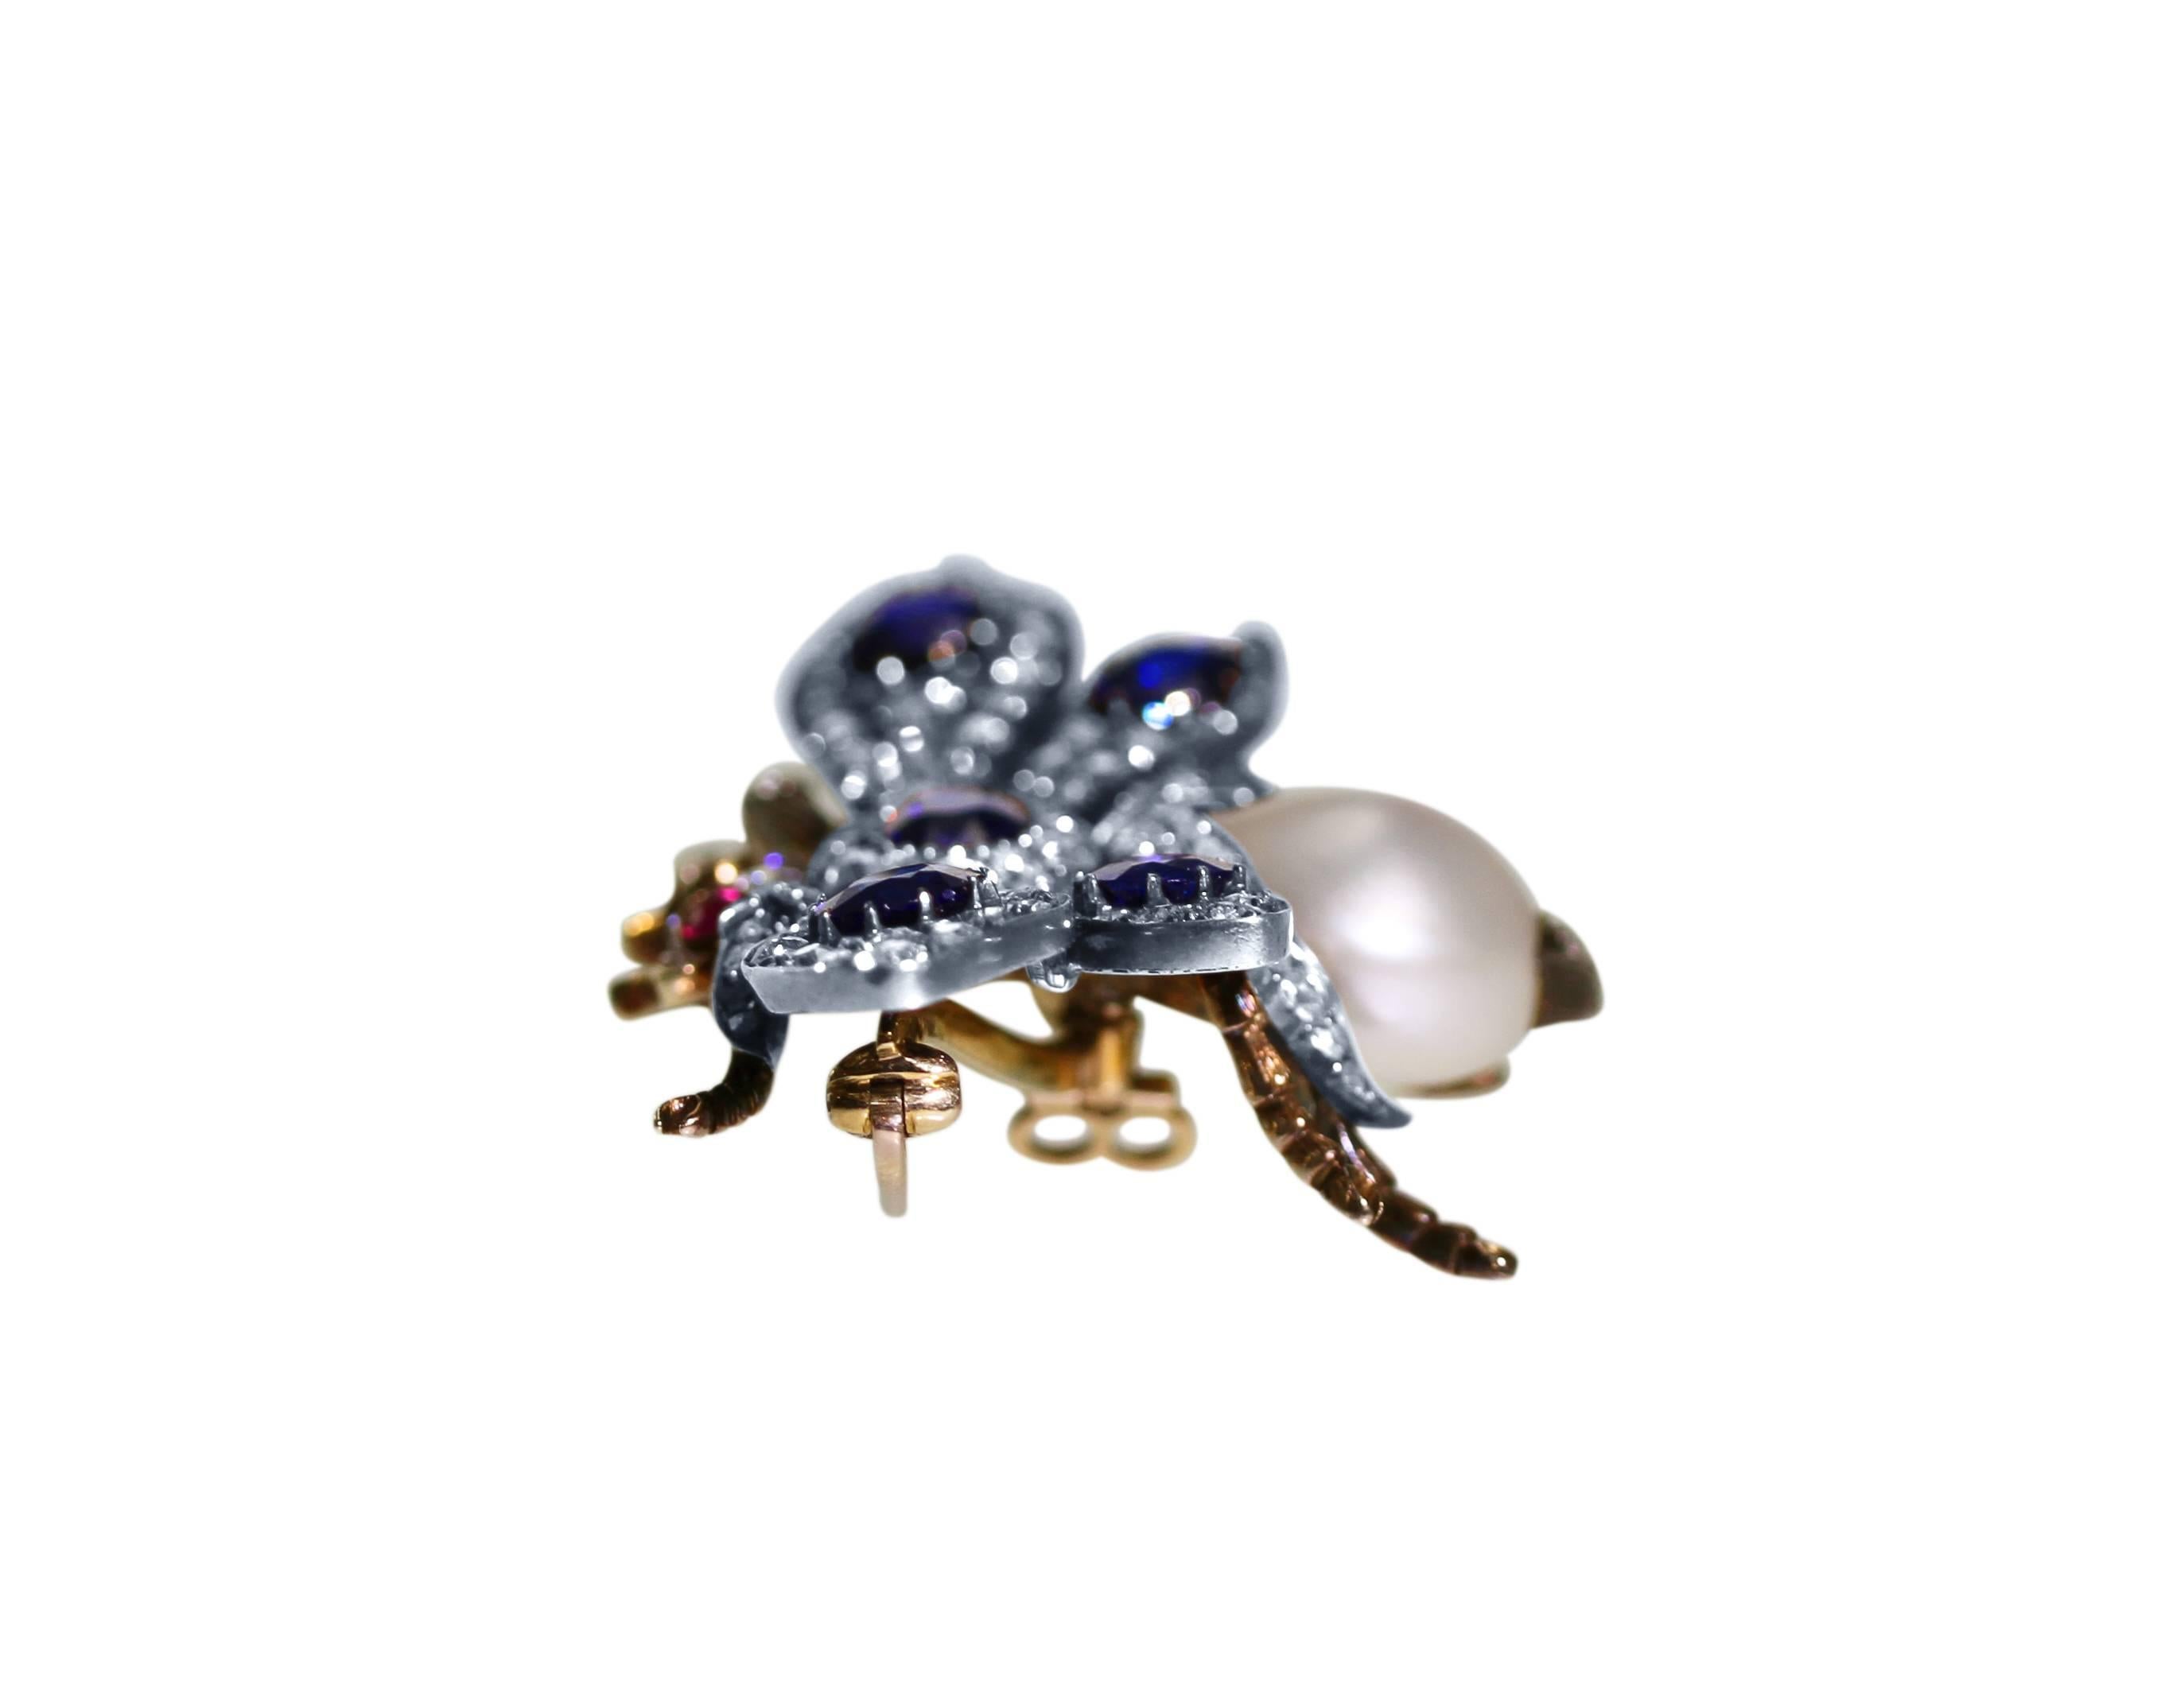 An antique silver-topped 14 karat gold, sapphire, diamond, pearl and ruby bumblebee brooch, designed as a standing bumblebee set with 5 deep bright blue natural sapphires weighing approximately 5.00 carats, 141 old-mine and rose-cut diamonds